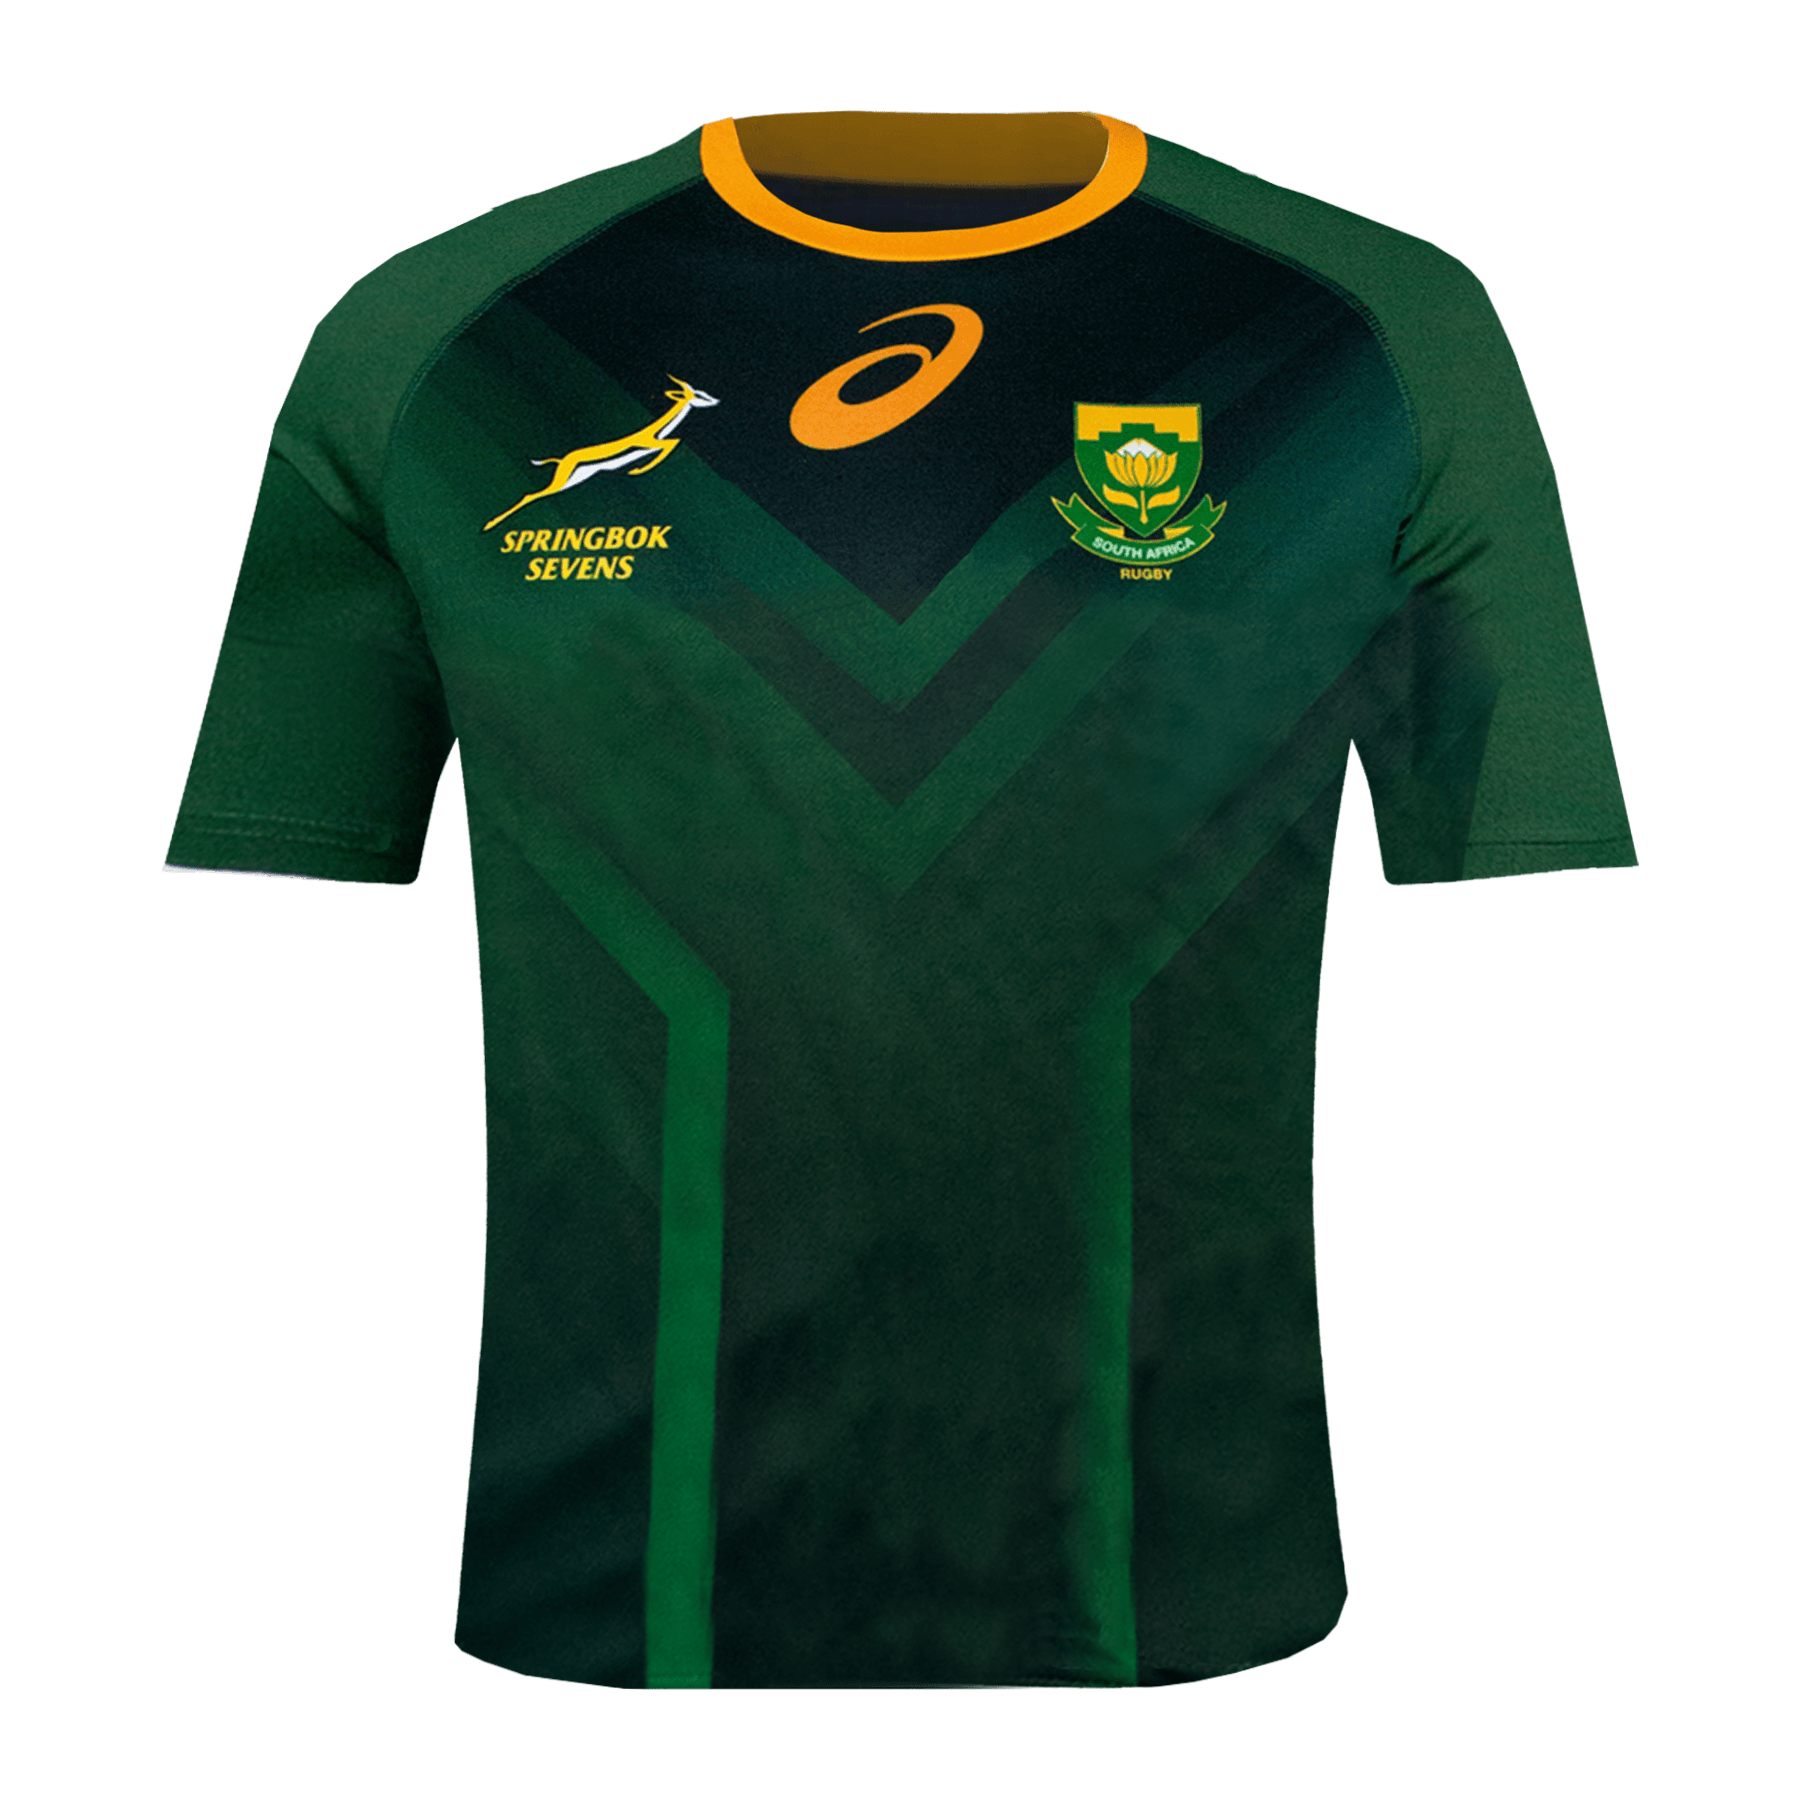 Springboks Rugby Youth Sevens Jersey 2020 by Asics  Official South Africa  Rugby Gear - World Rugby Shop